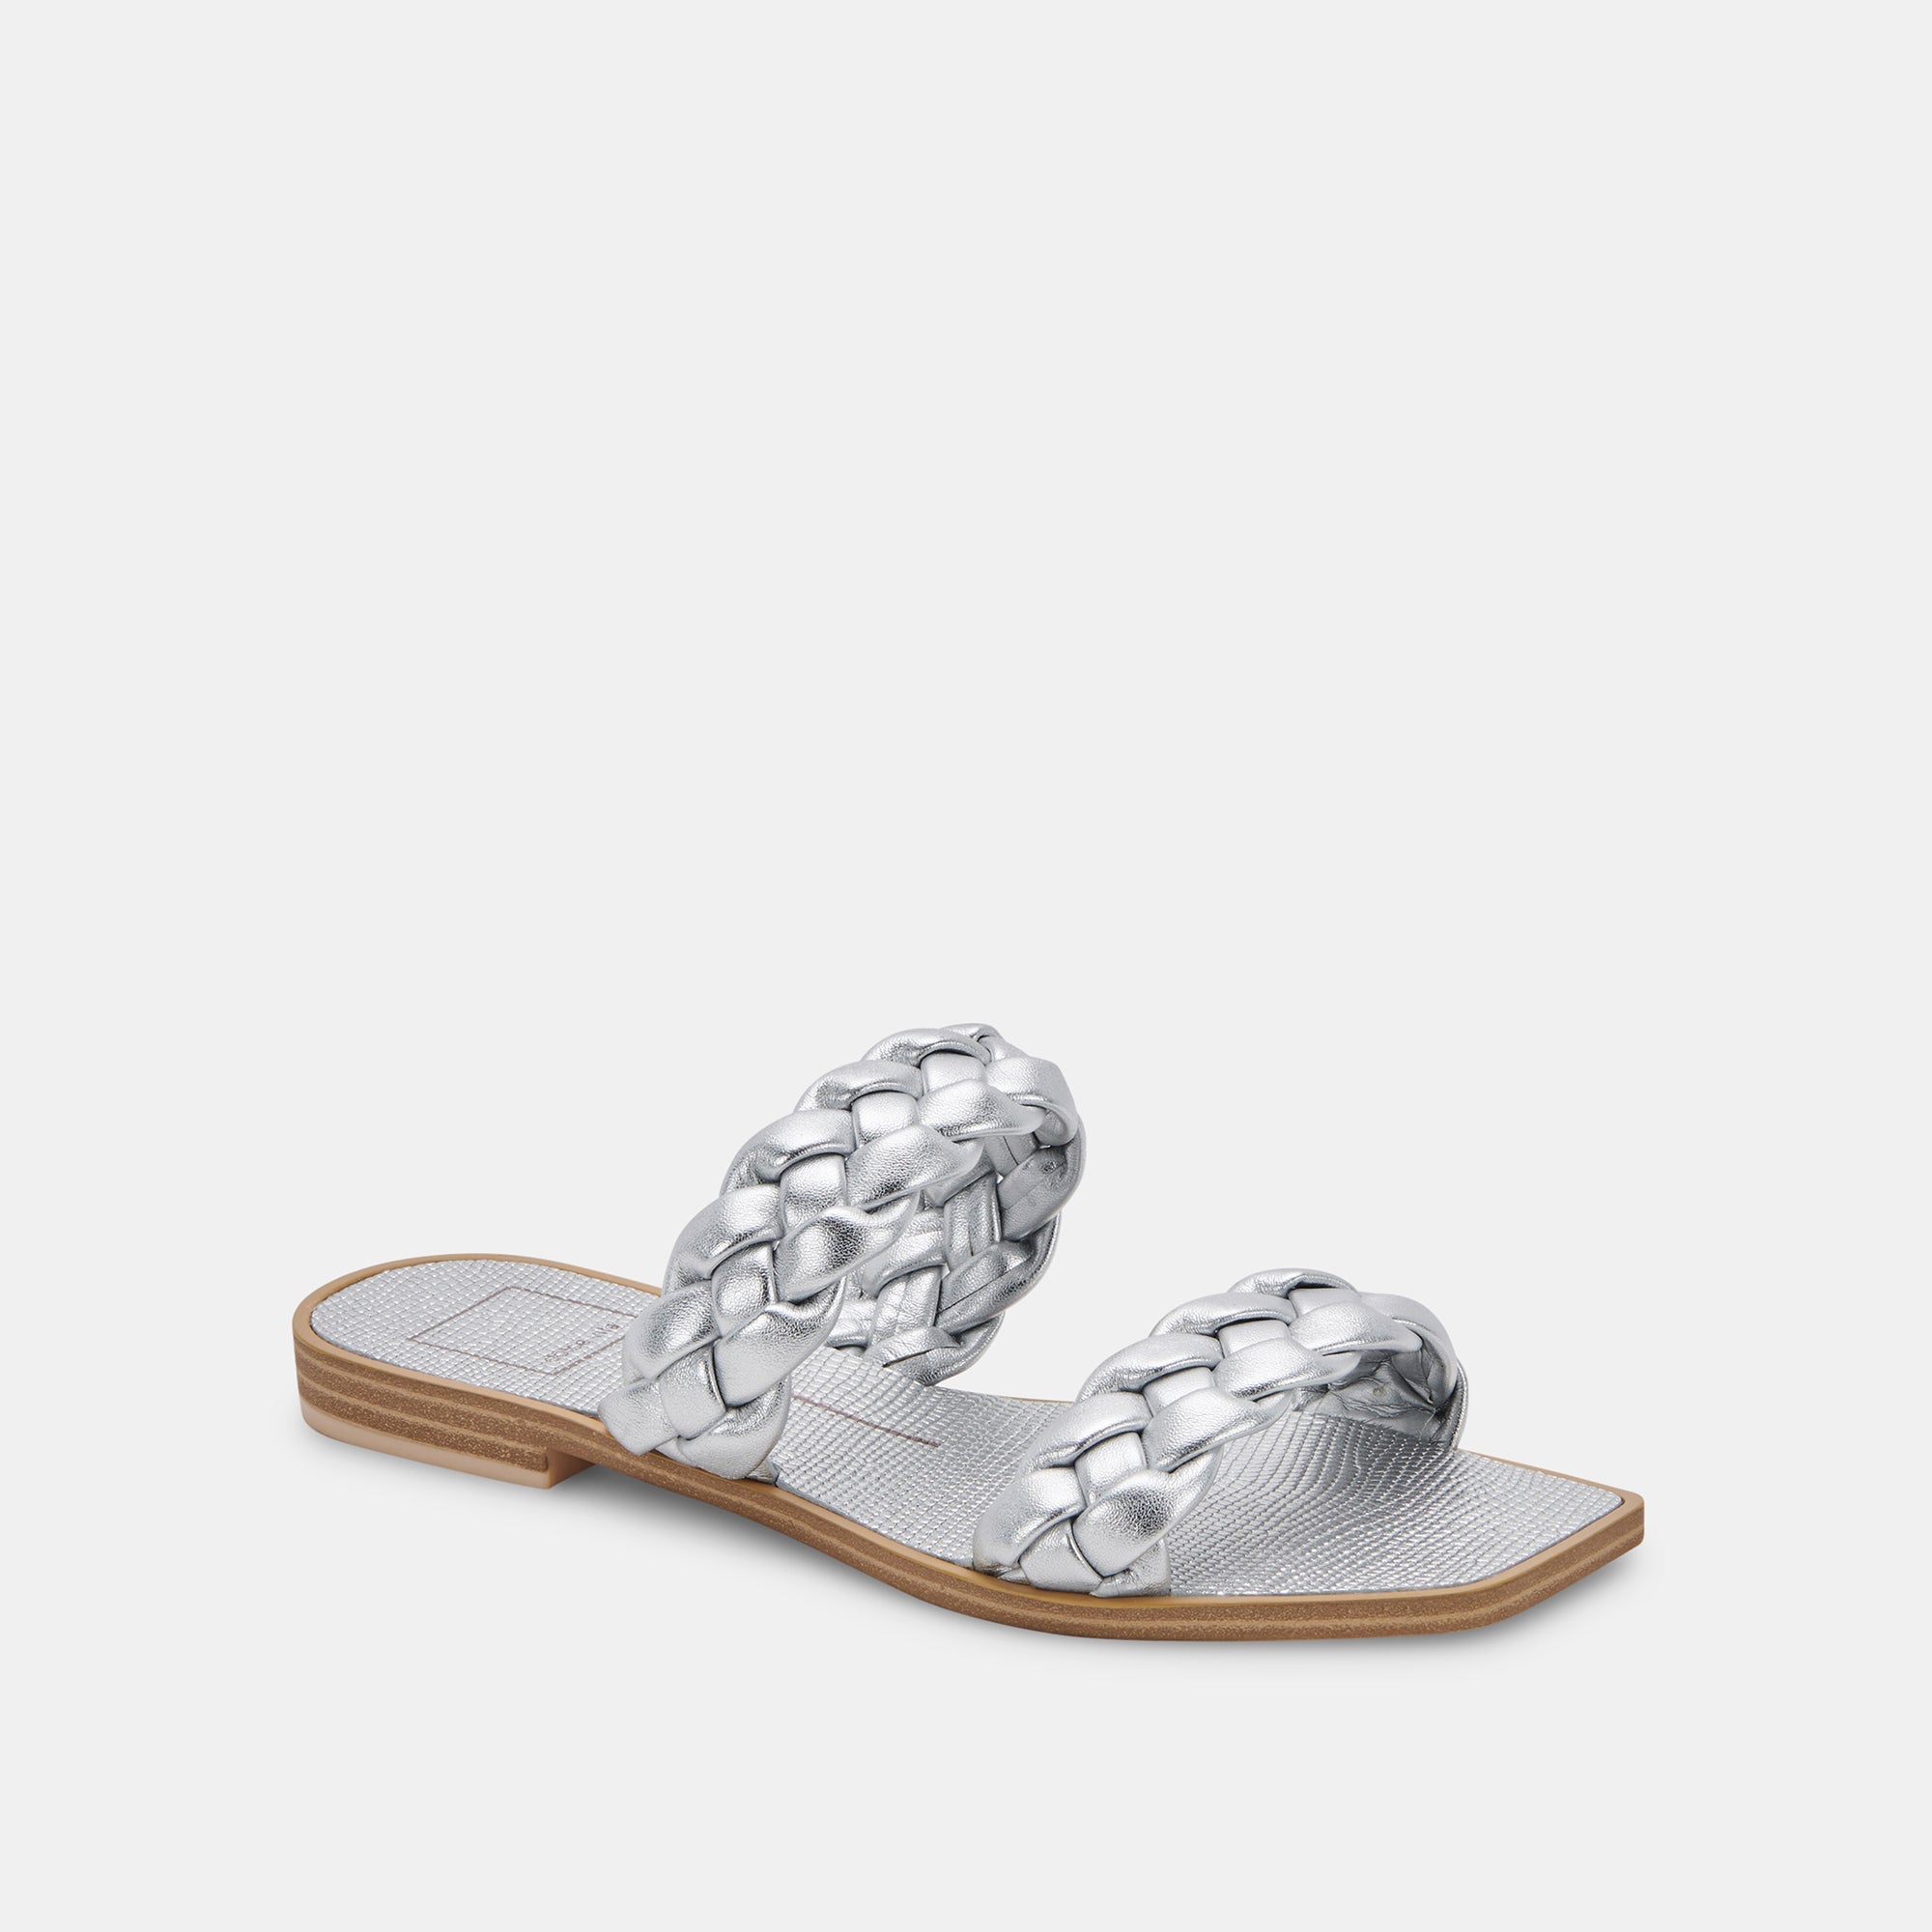 Indy Sandals in Silver Metallic